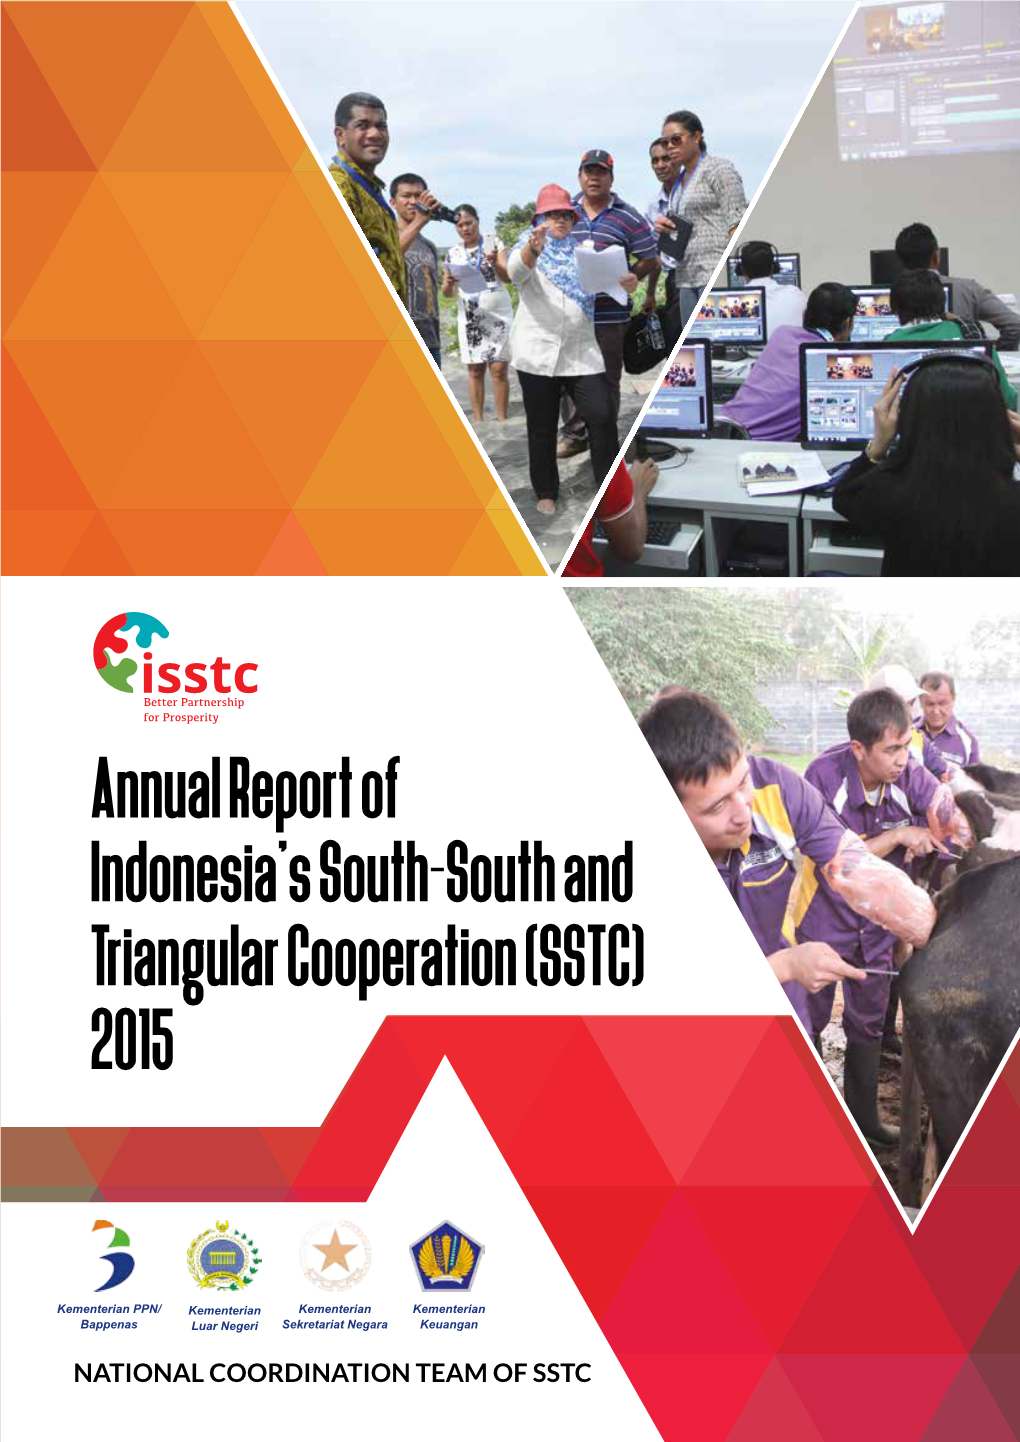 Annual Report of Indonesia's South-South and Triangular